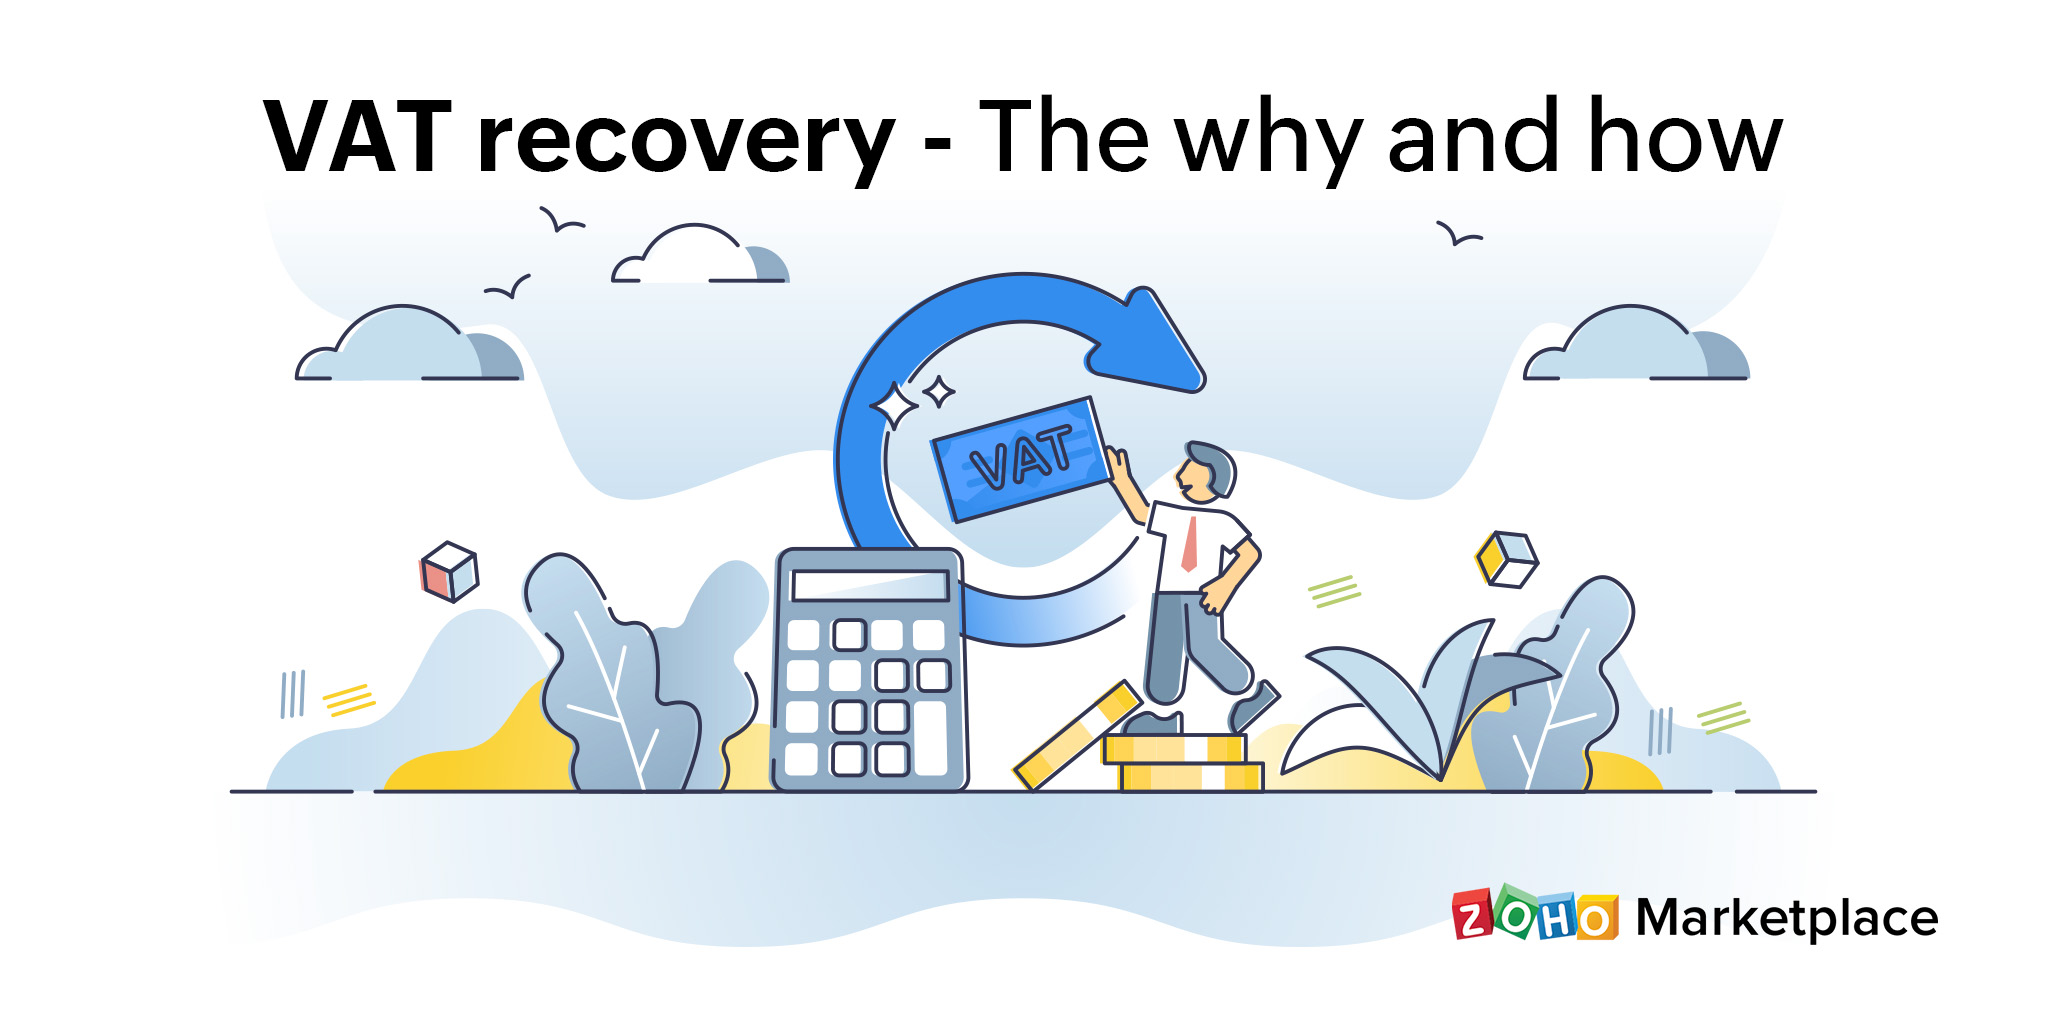 VAT recovery - The why and how